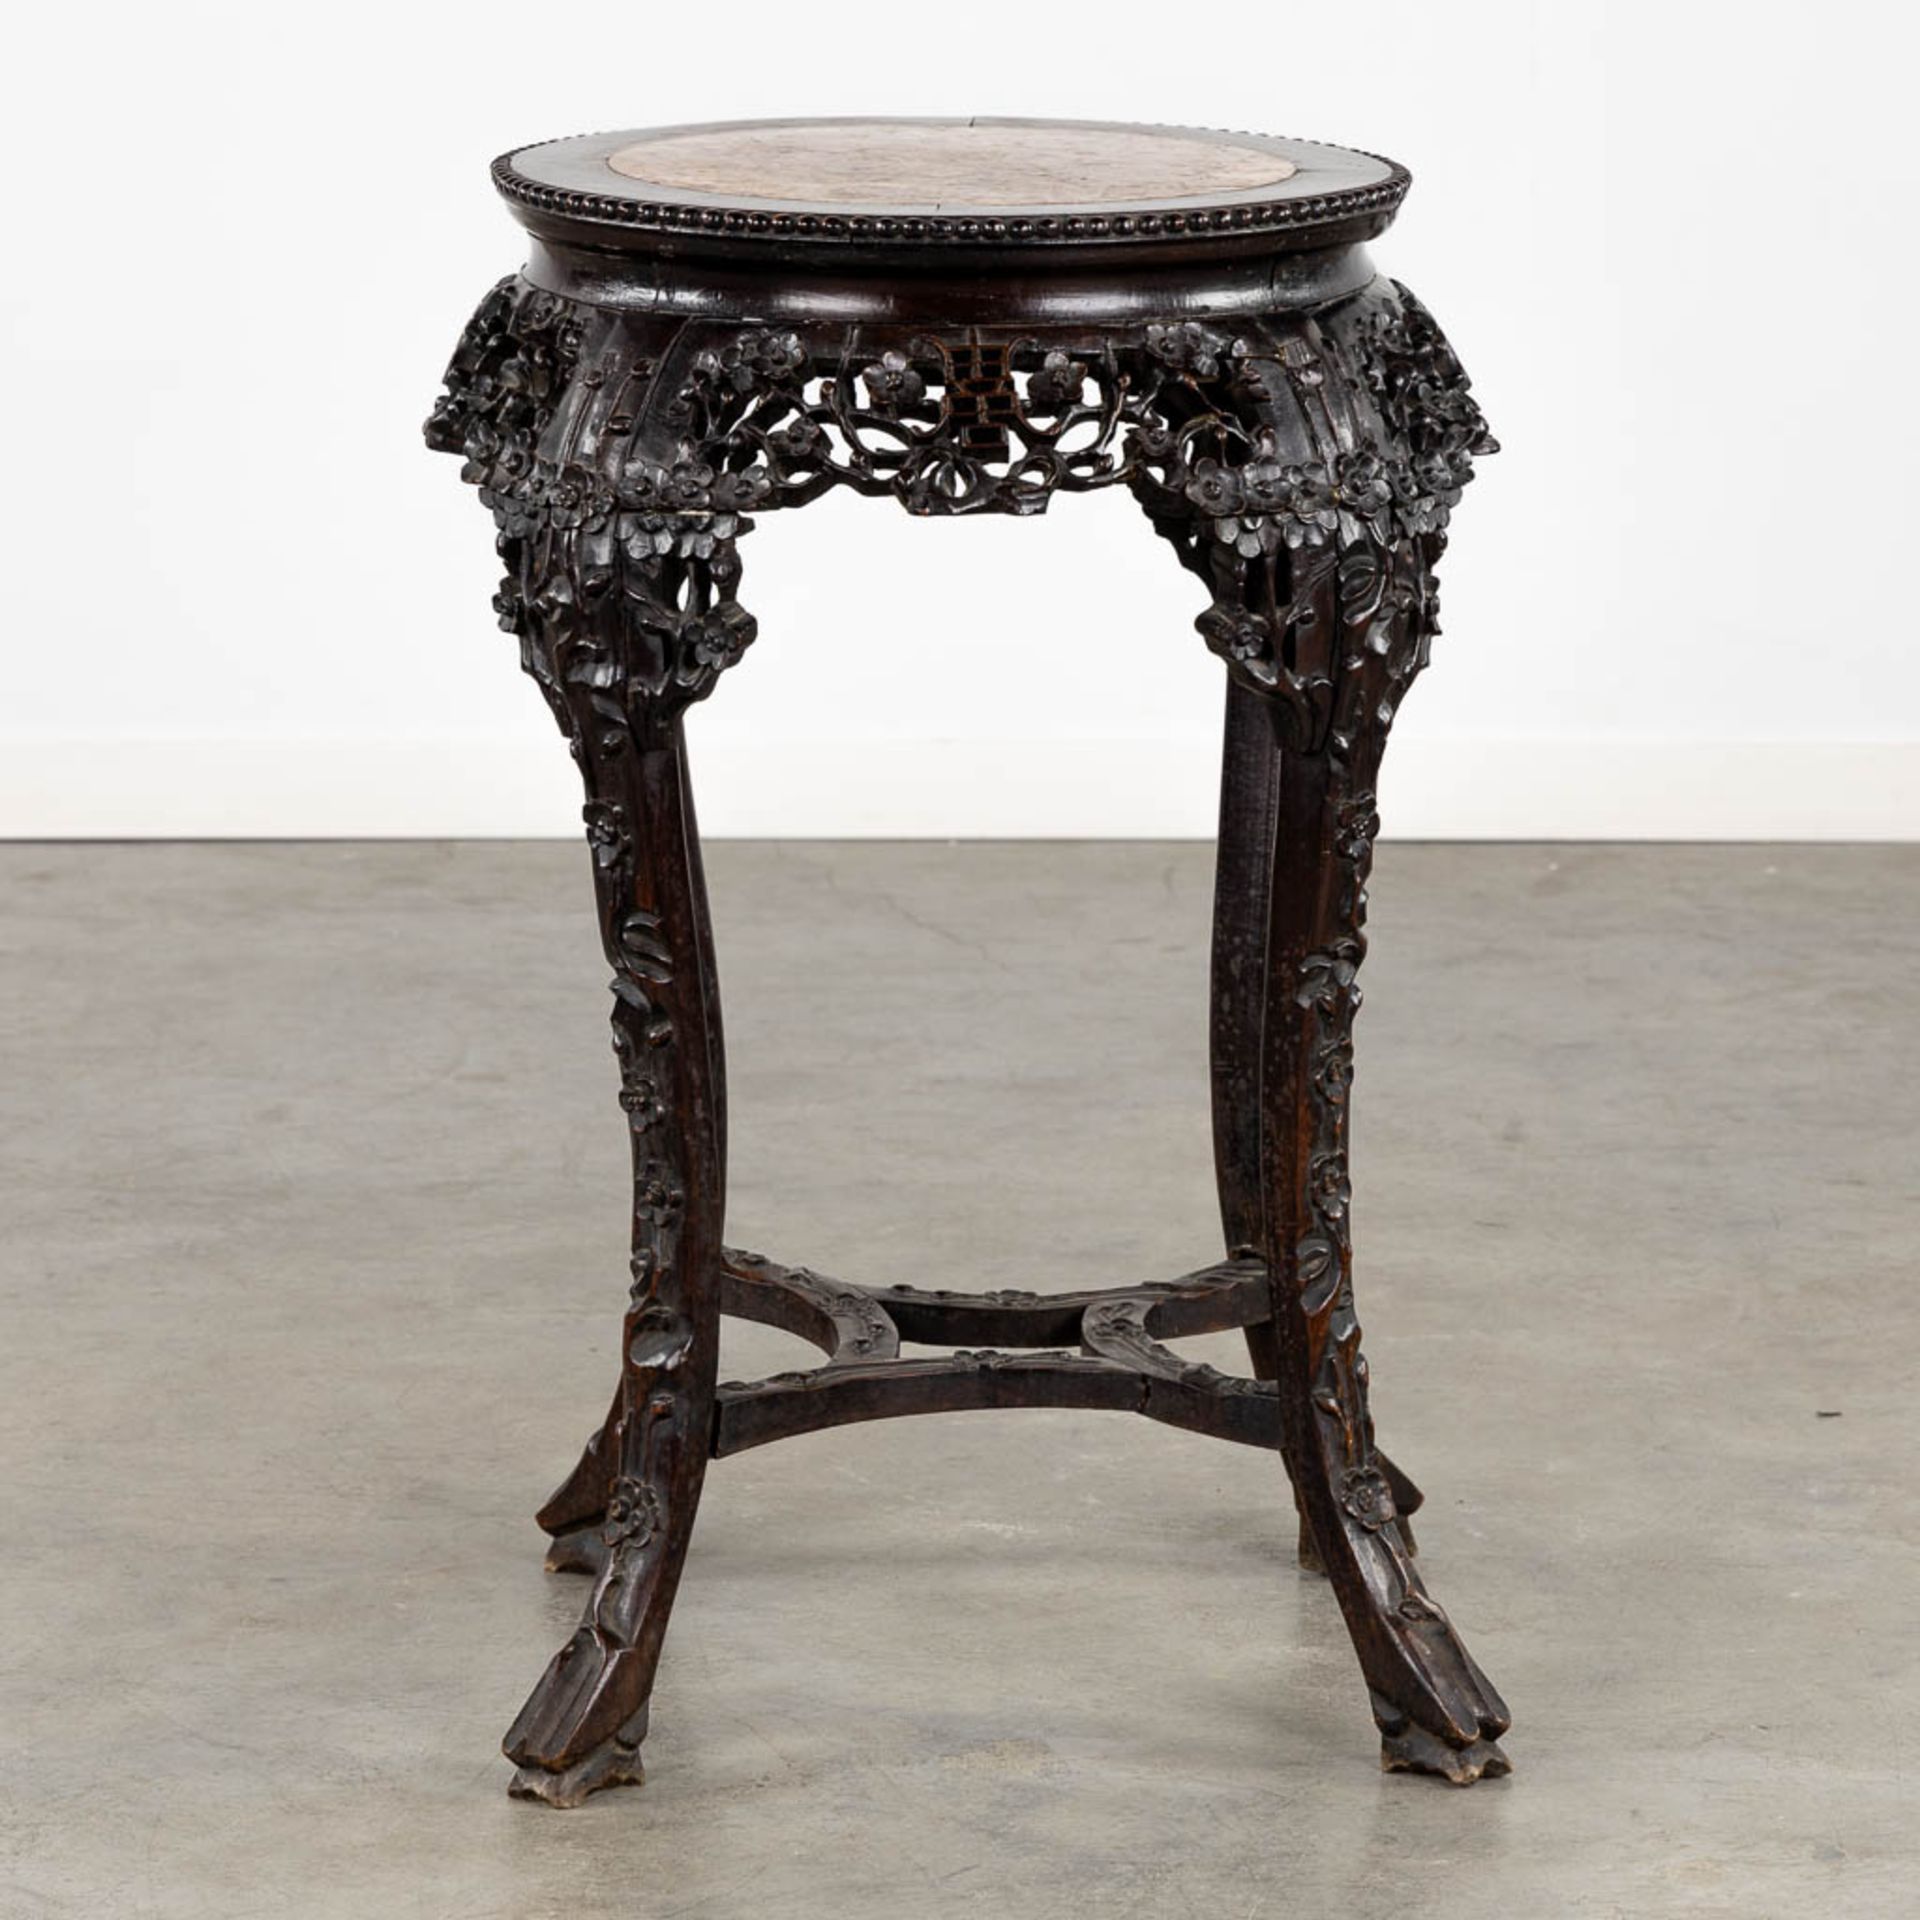 A richly sculptured Chinese hardwood side table or pedestal with a marble. (H:71 x D:53 cm)